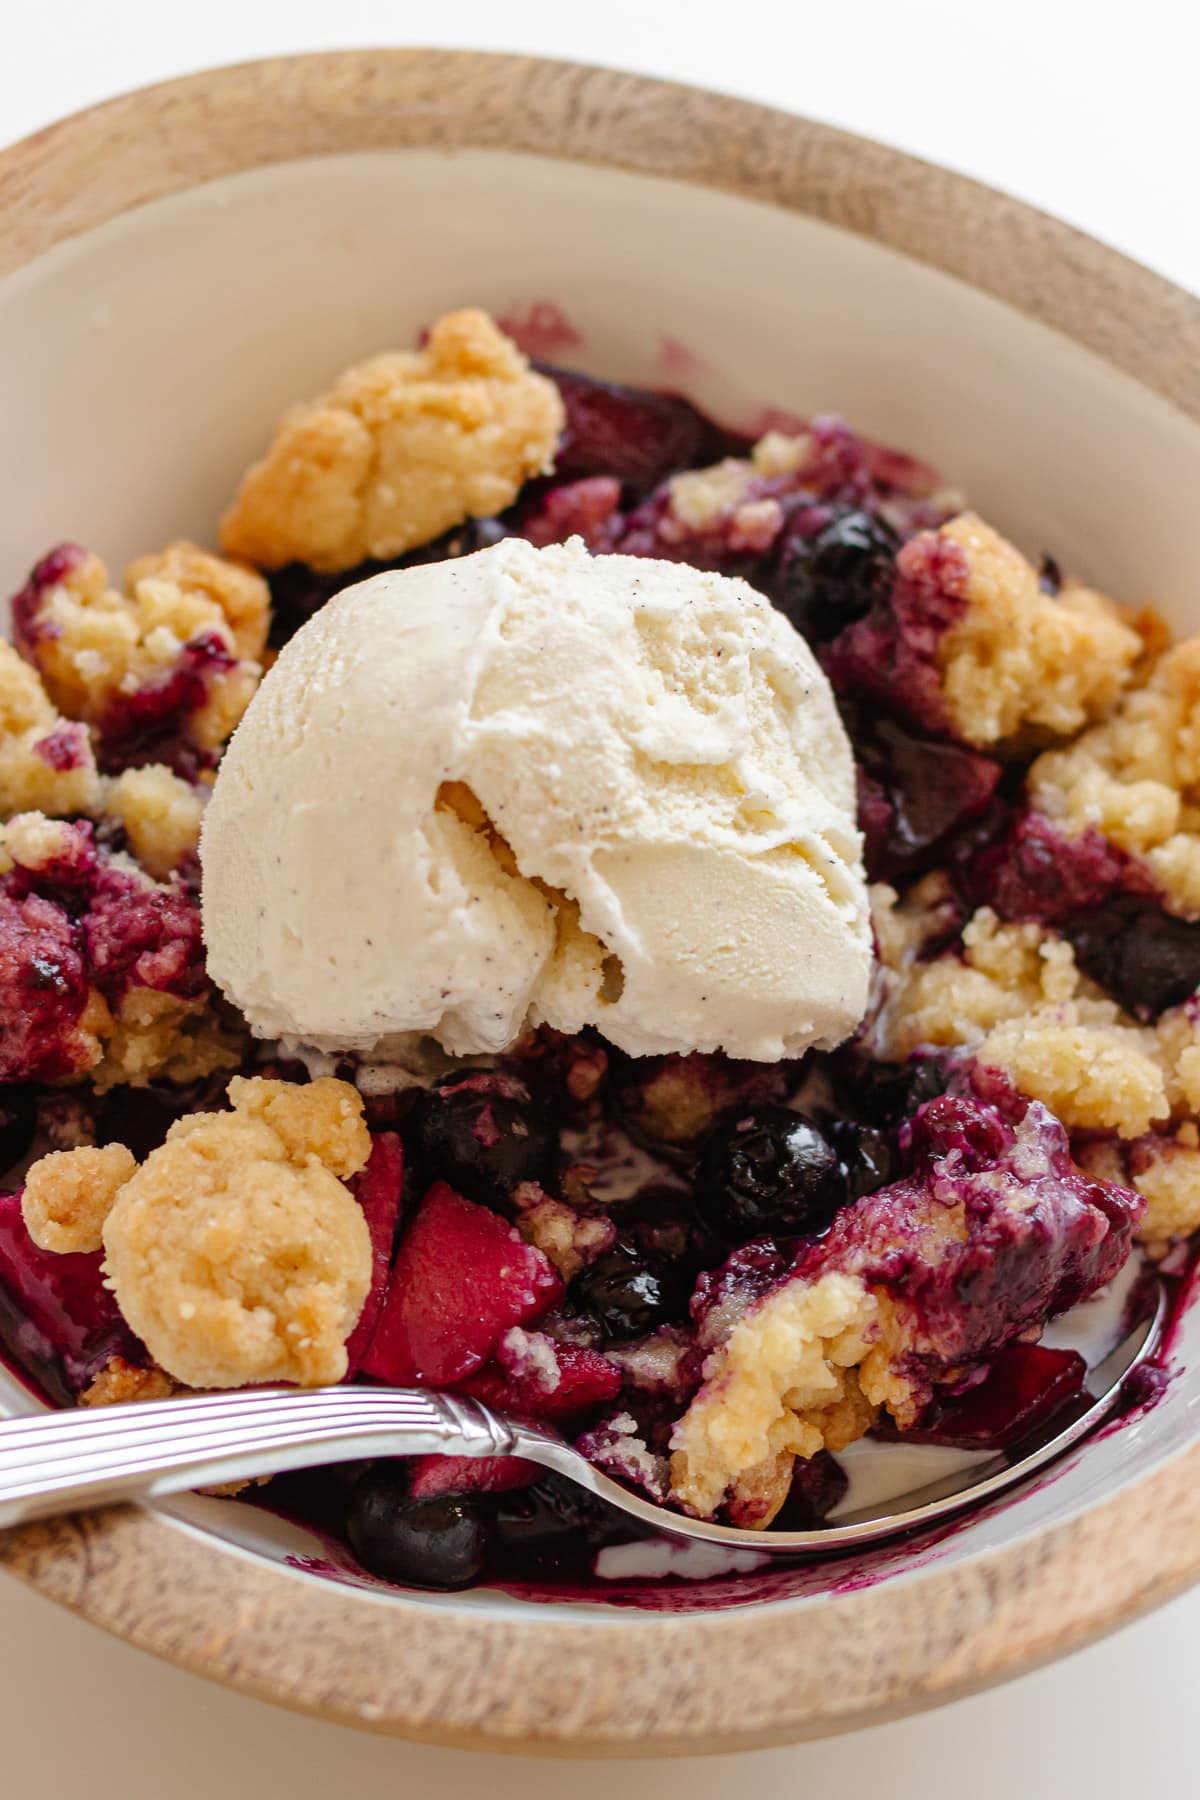 Bowl of apple and blueberry crumble with a scoop of vanilla ice cream on top.